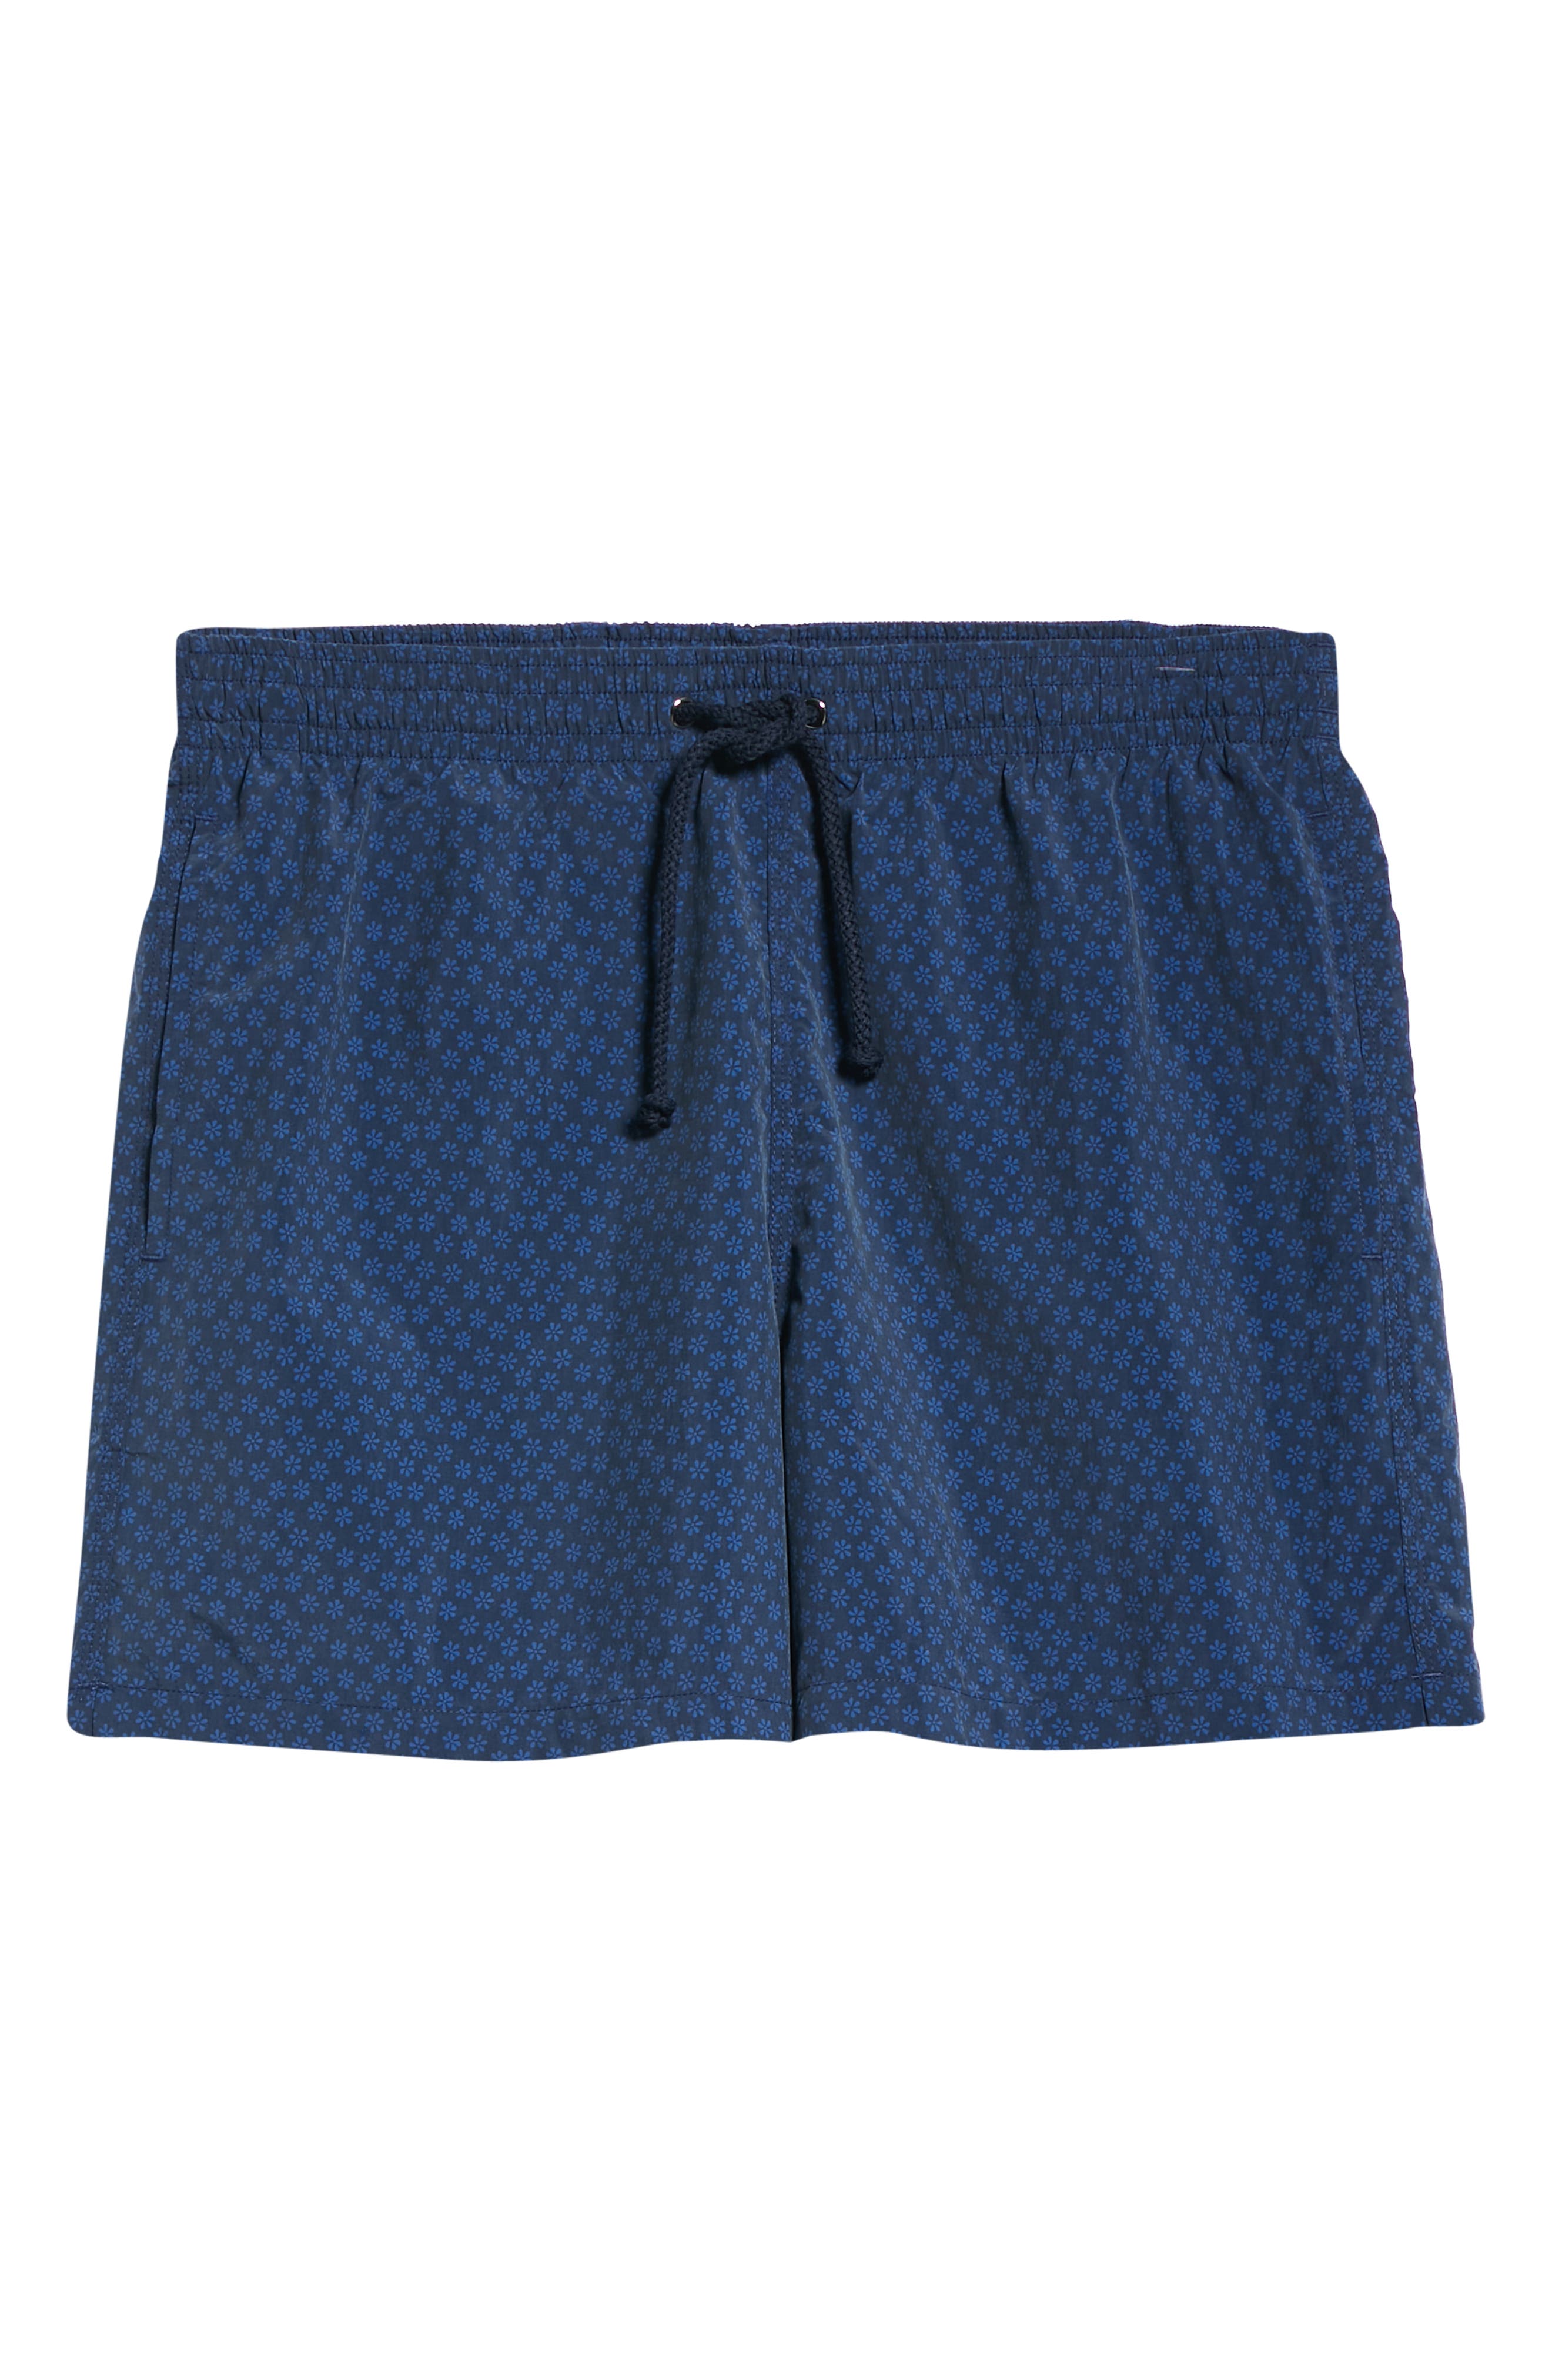 Canali Floral Swim Trunks in Navy